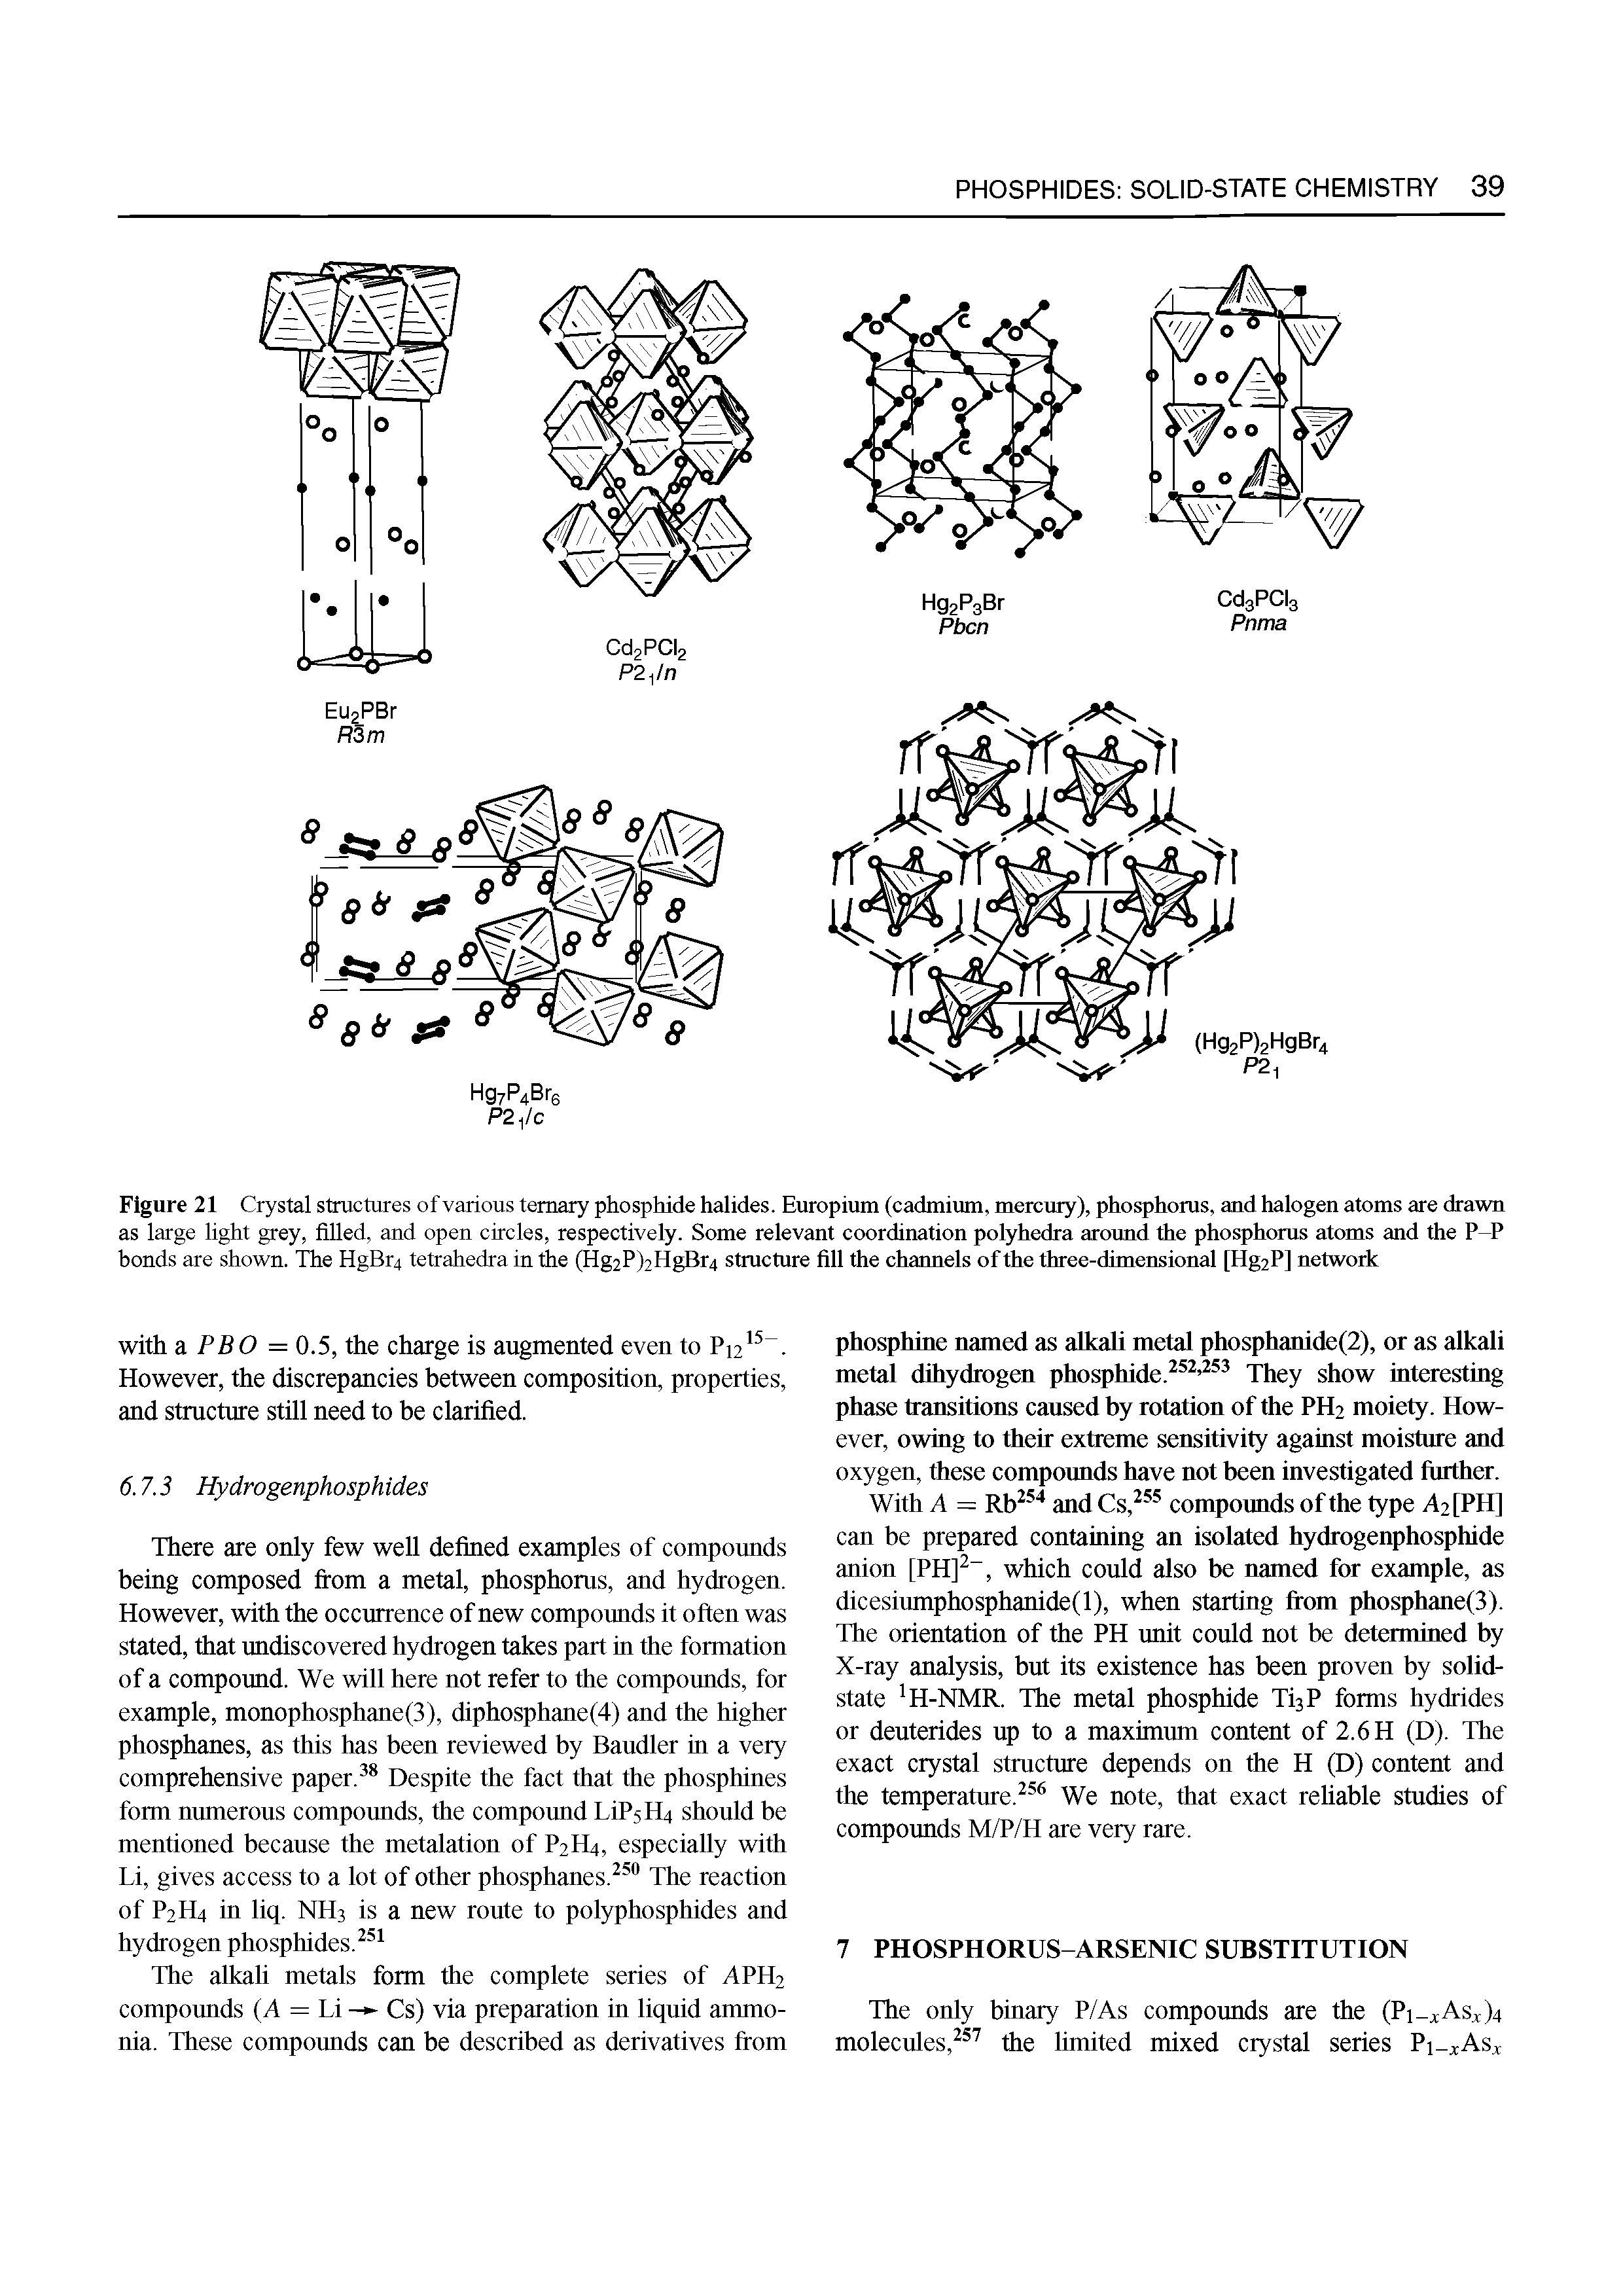 Figure 21 Crystal structures of various ternary phosphide halides. Europium (cadmium, mercmy), phosphorus, and halogeu atoms are drawn as large light grey, filled, and open circles, respectively. Some relevant coordination polyhedra aroimd the phosphorus atoms and the P-P bonds are shown. The HgBr4 tetrahedra in the (Hg2P)2HgBr4 strucmre fill the channels of the three-dimensional [Hg2P] network...